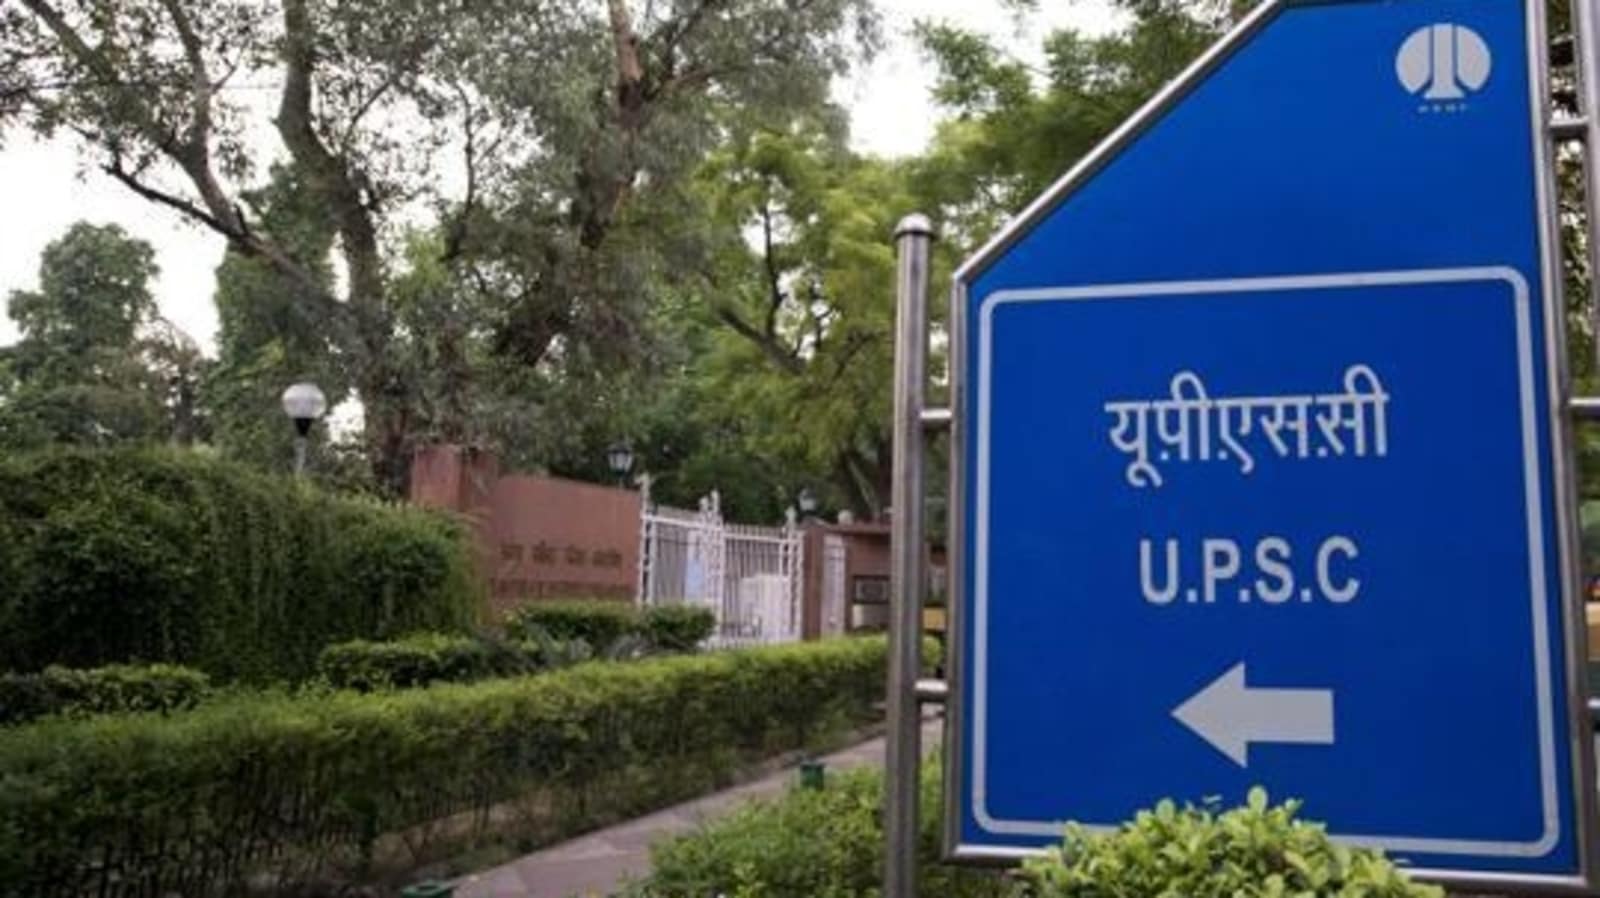 UPSC CDS (II) exam 2020: Marks of recommended candidates released